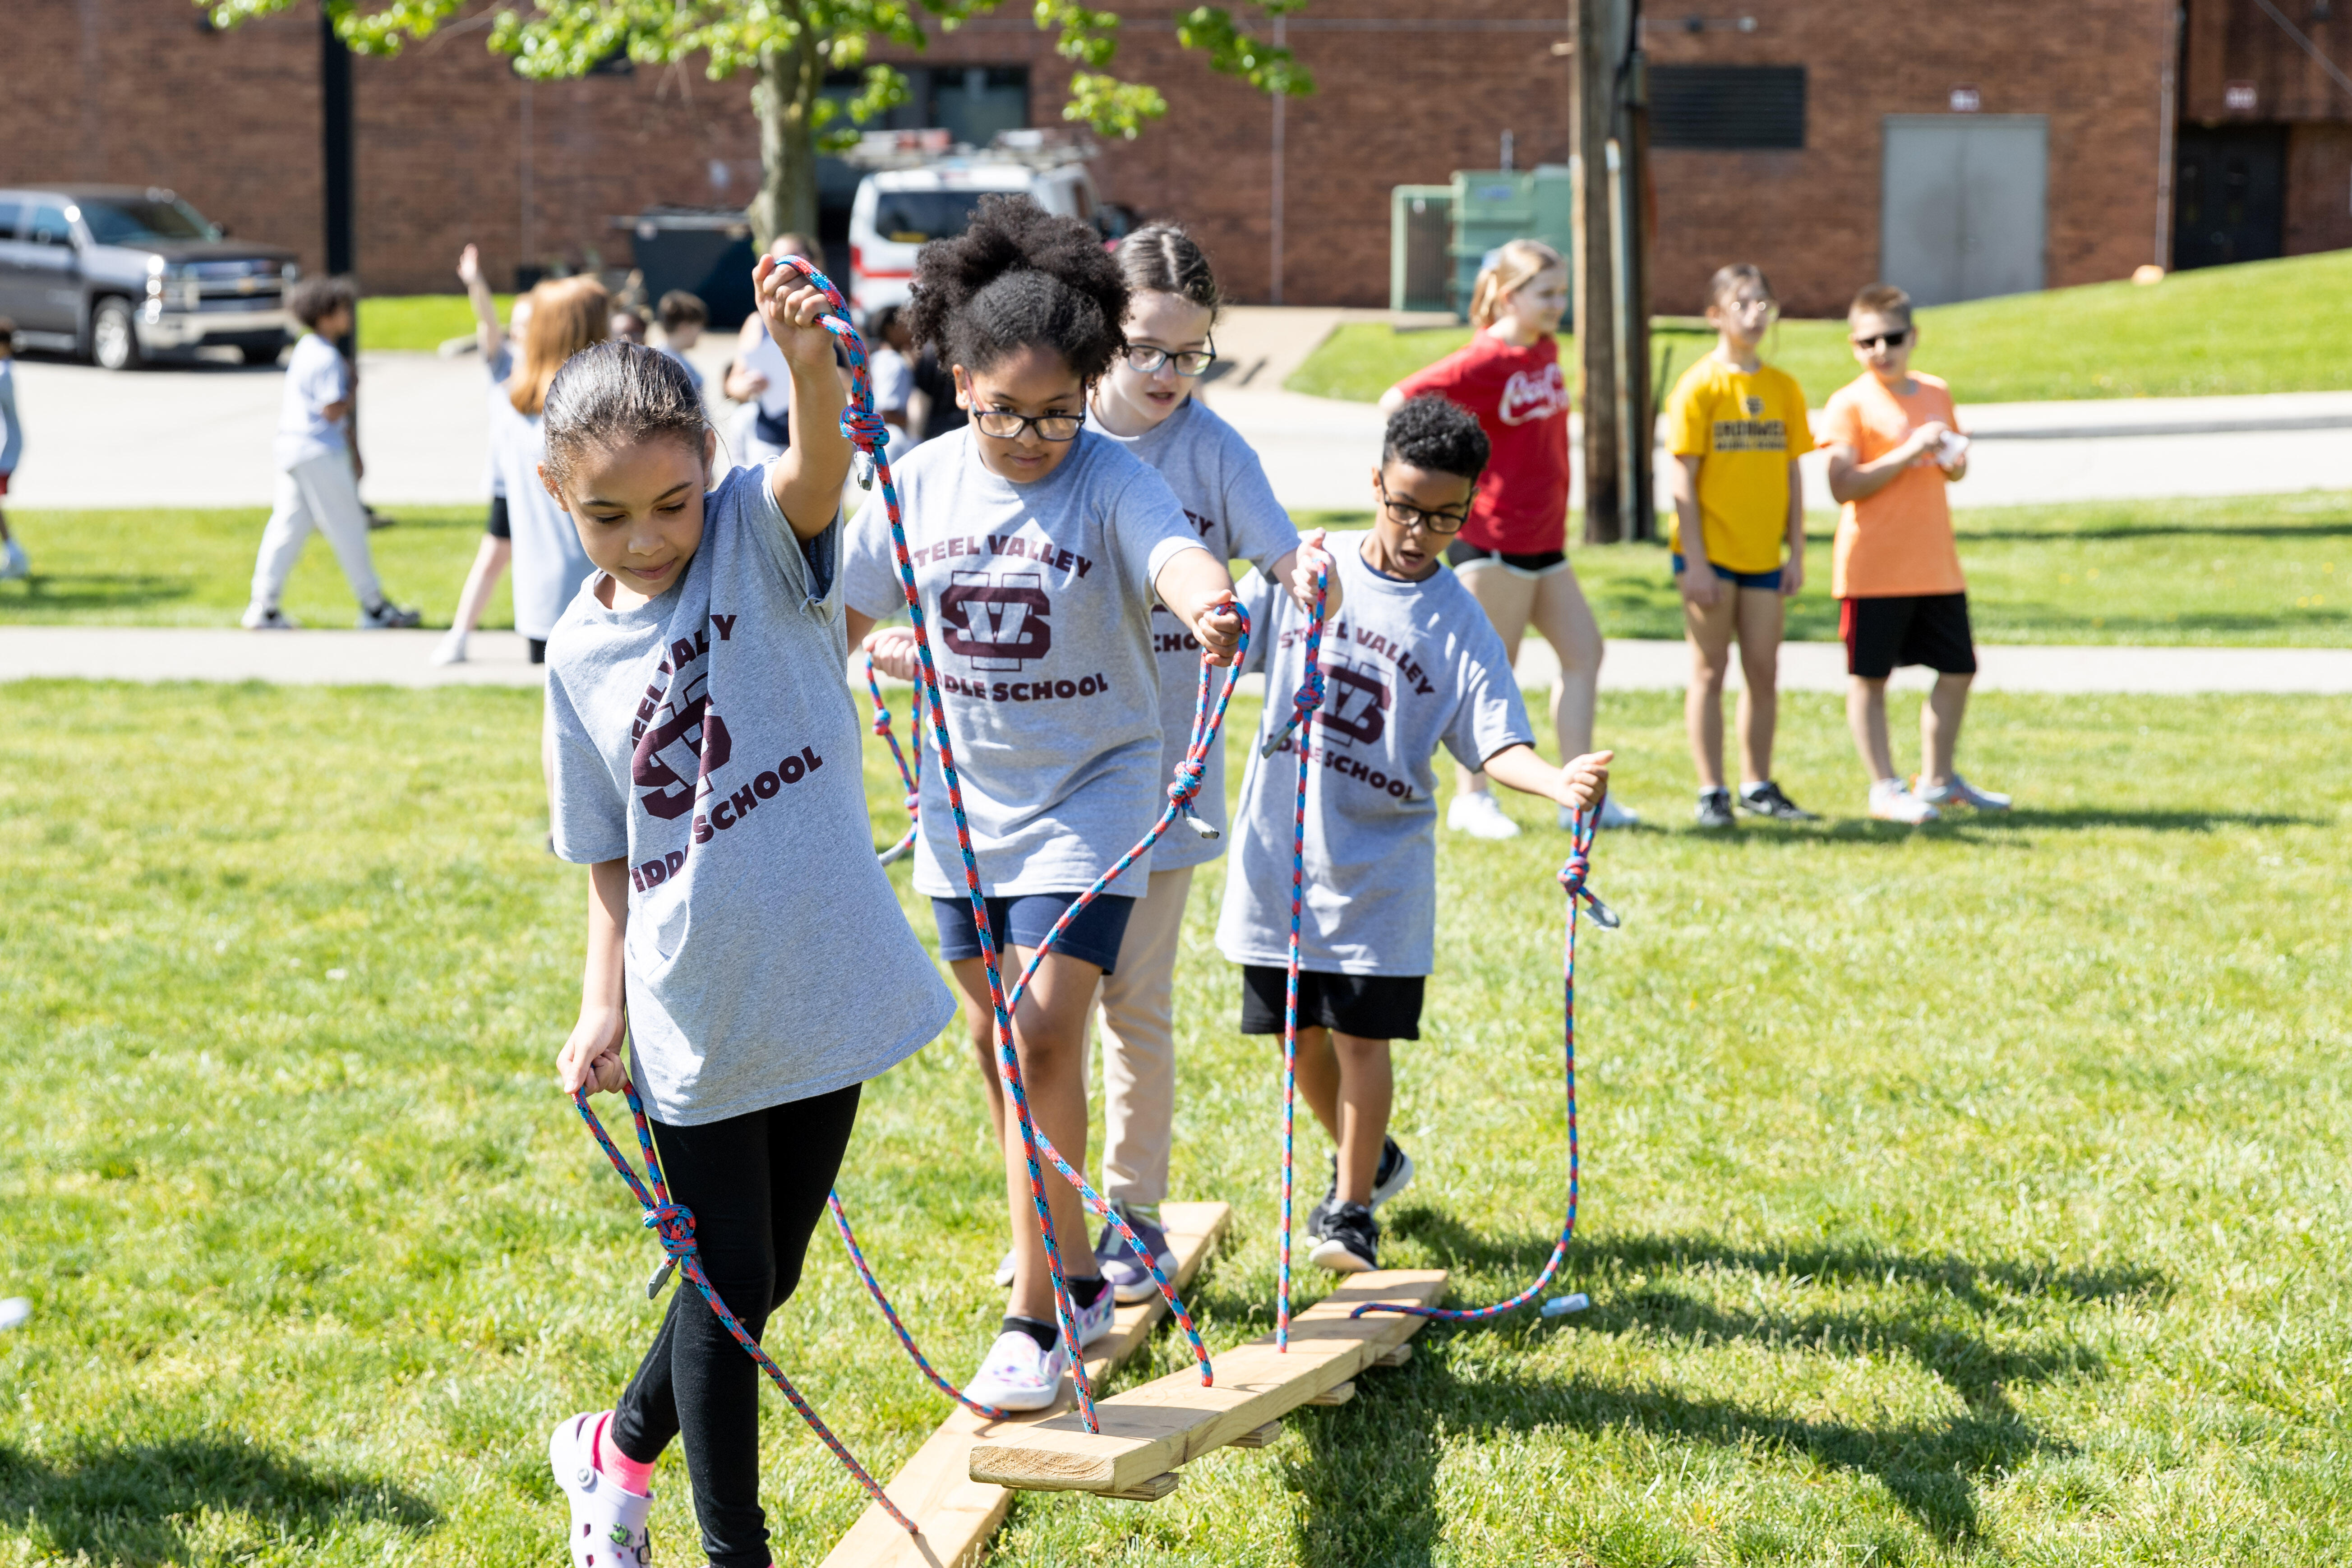 Students use ropes to pull up boards as part of a bonding activity